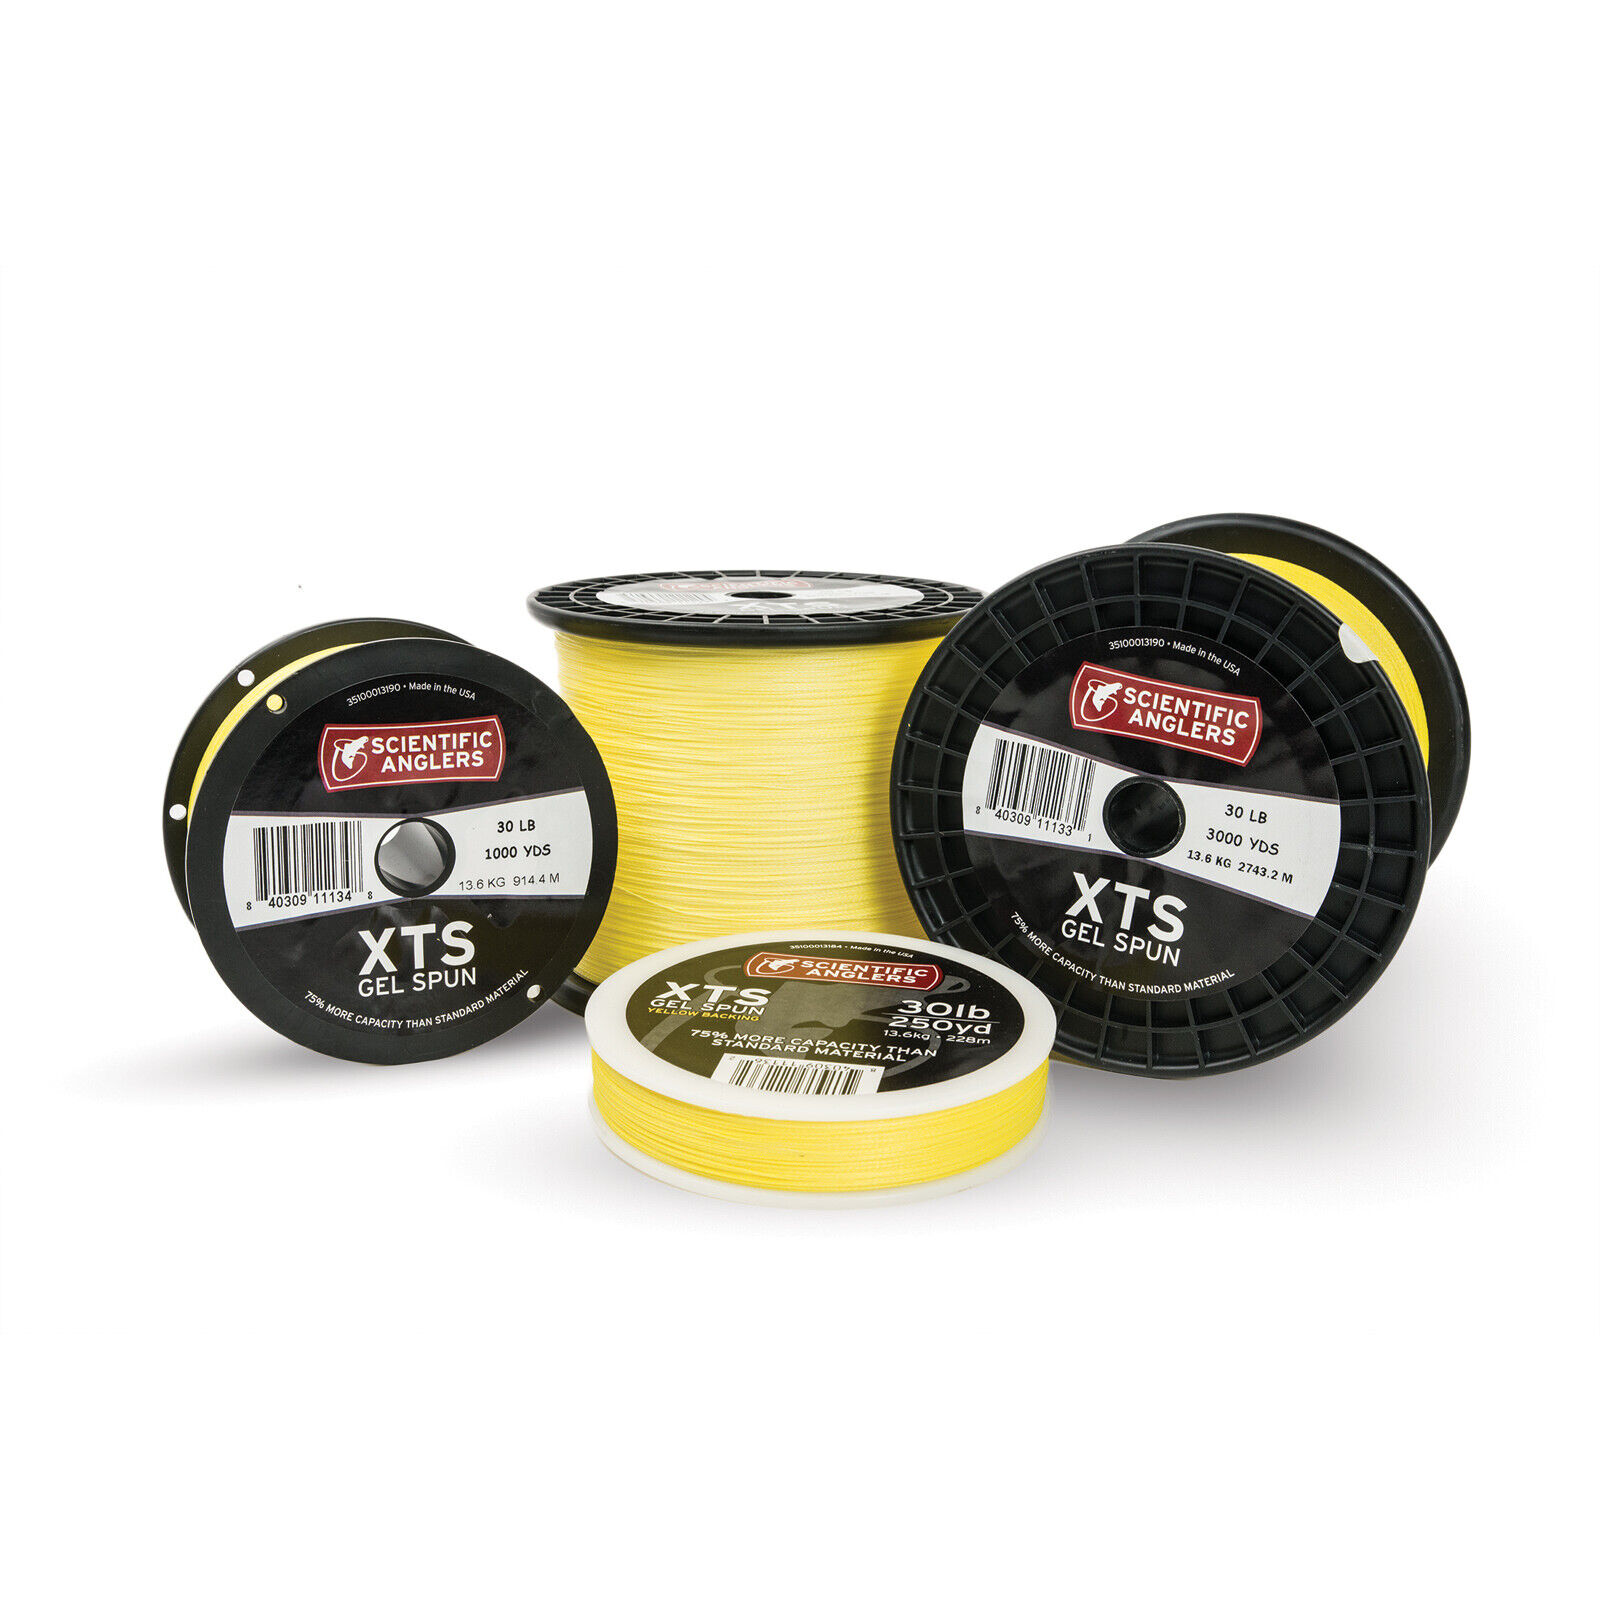 Scientific Anglers XTS Gel Spun Fly Line Backing - All Sizes